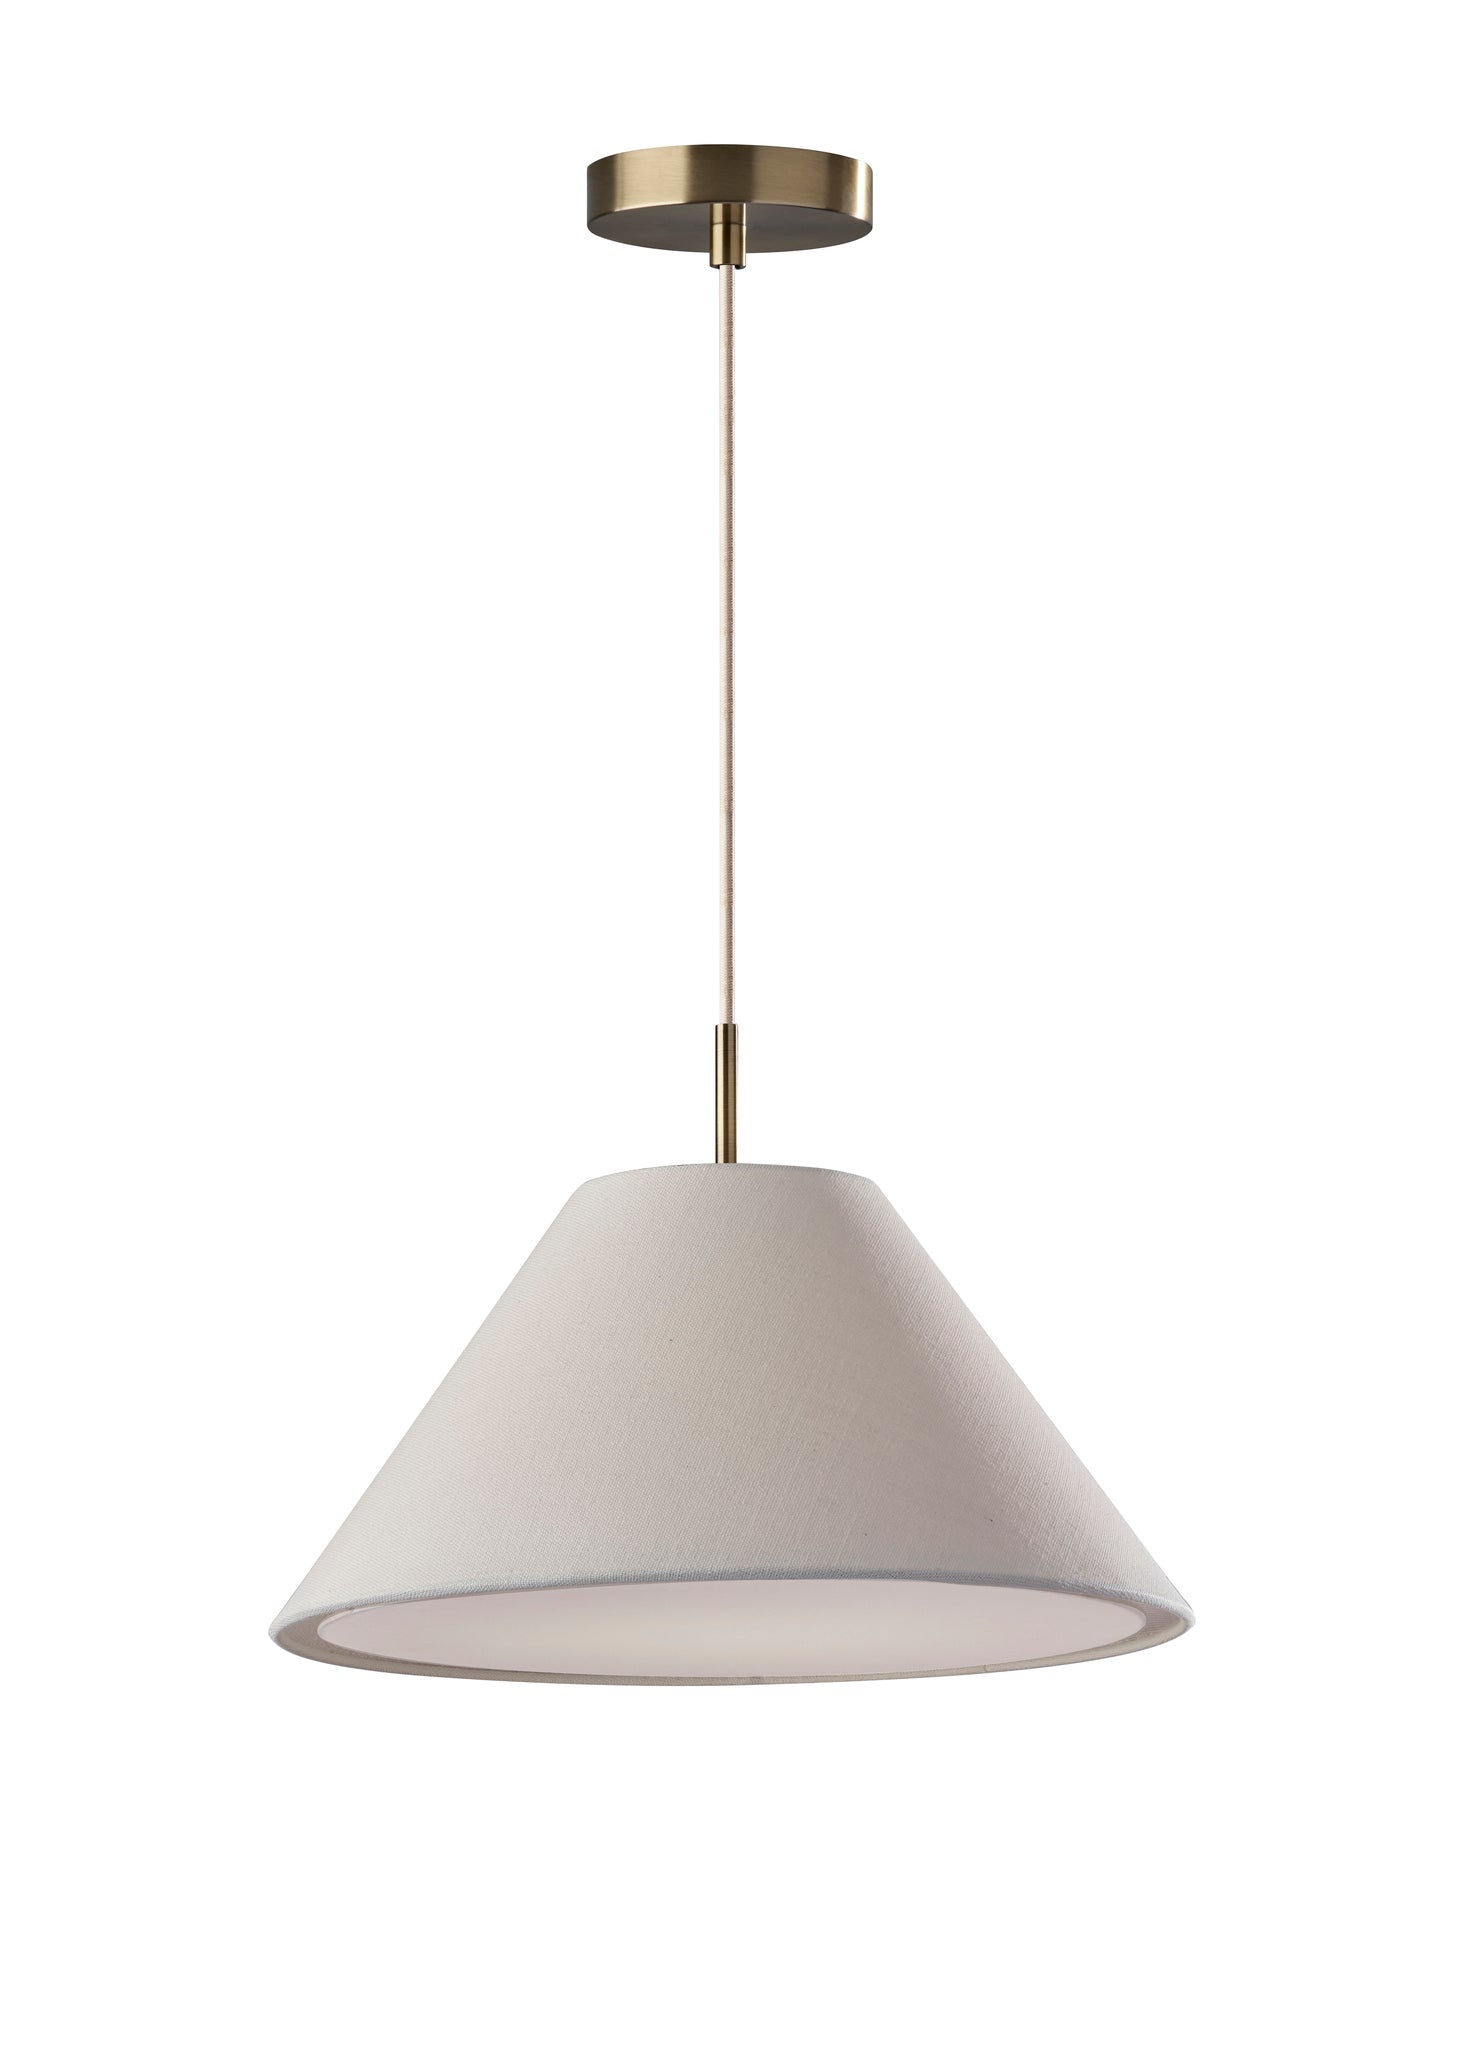 Adesso Ceiling Lamps - Hadley Pendant White Textured Fabric & Antique Brass